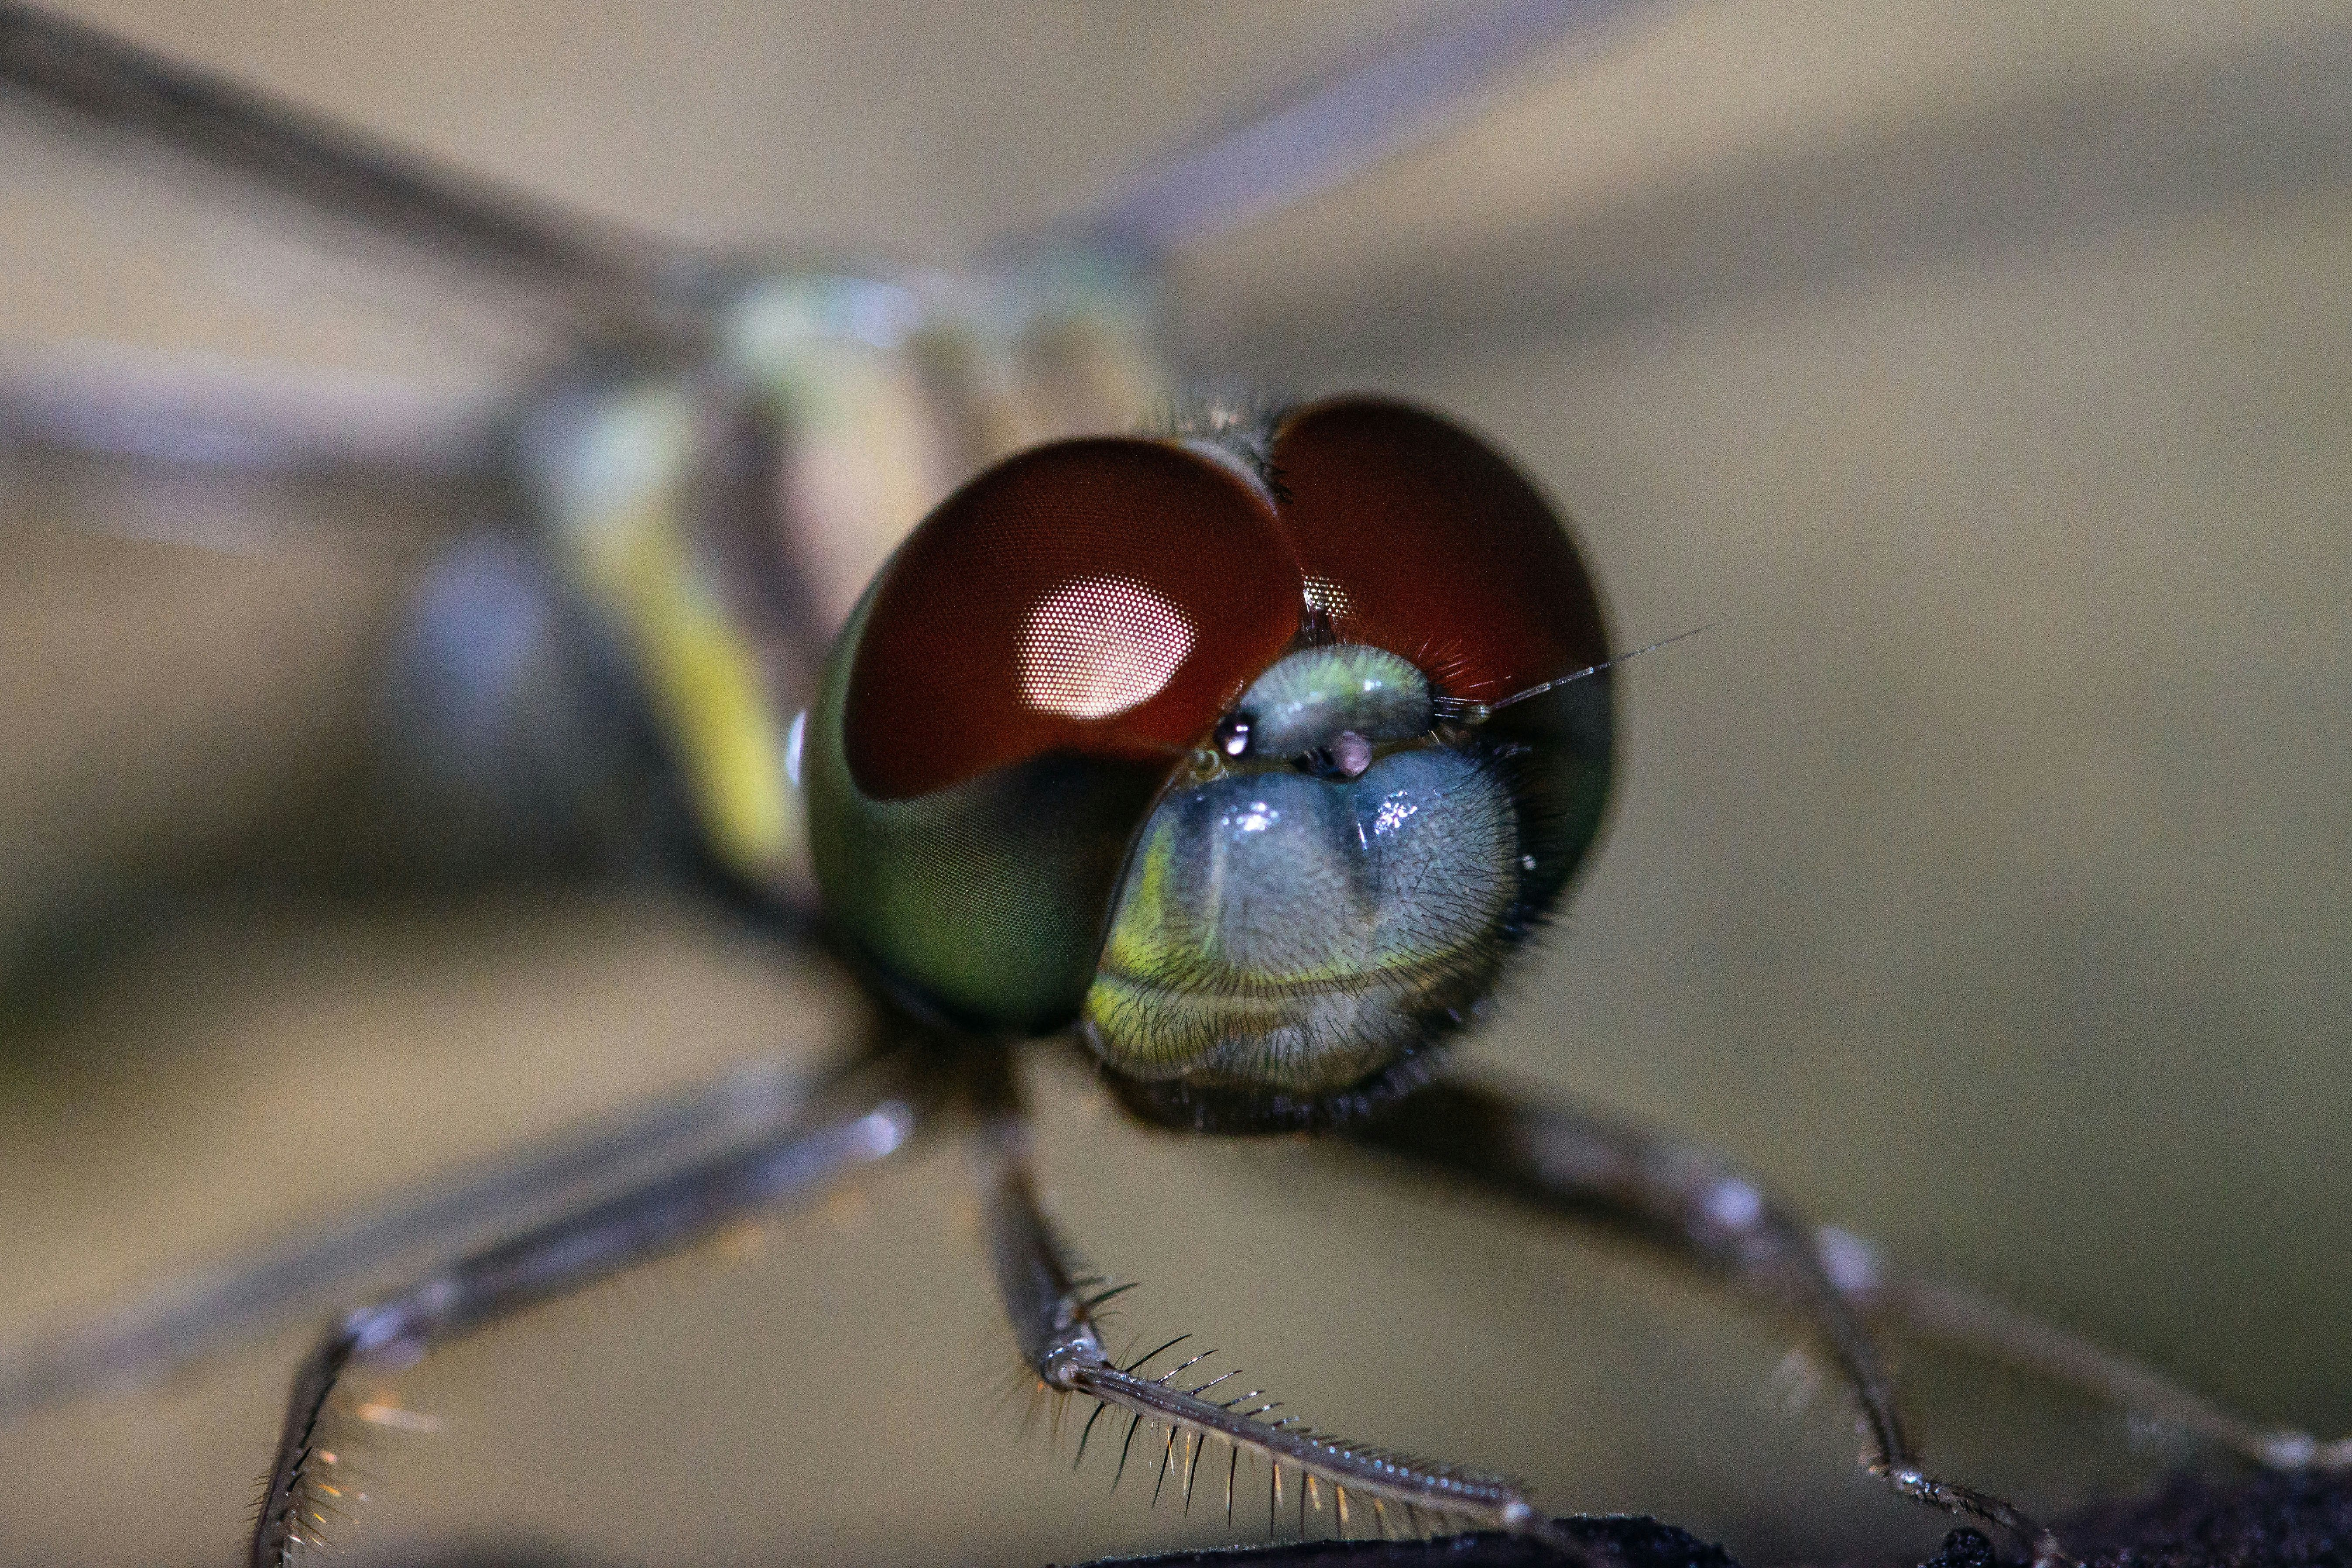 green and brown dragonfly in close up photography